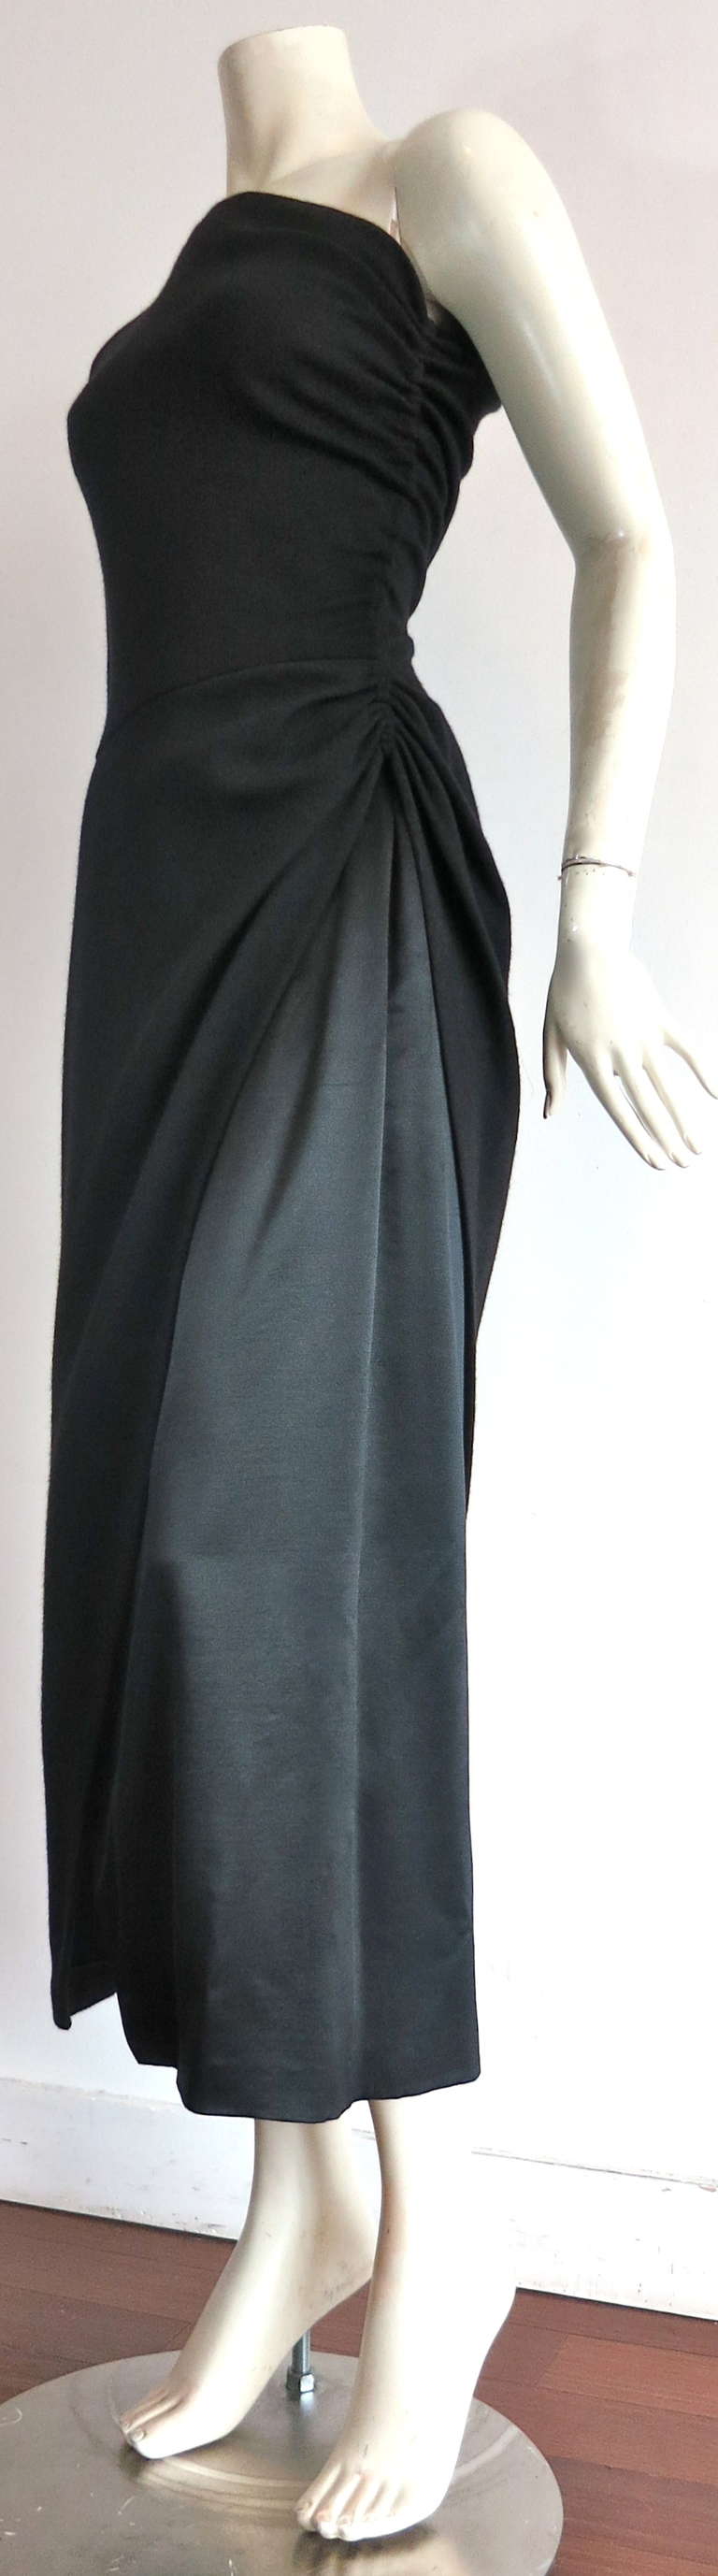 Vintage GEOFFREY BEENE One shoulder jersey & satin dress.

This gorgeous evening dress was designed by Geoffrey Beene during the late 1970's in New York City.  Literary provenance provided on request.

Modern one shoulder silhouette with